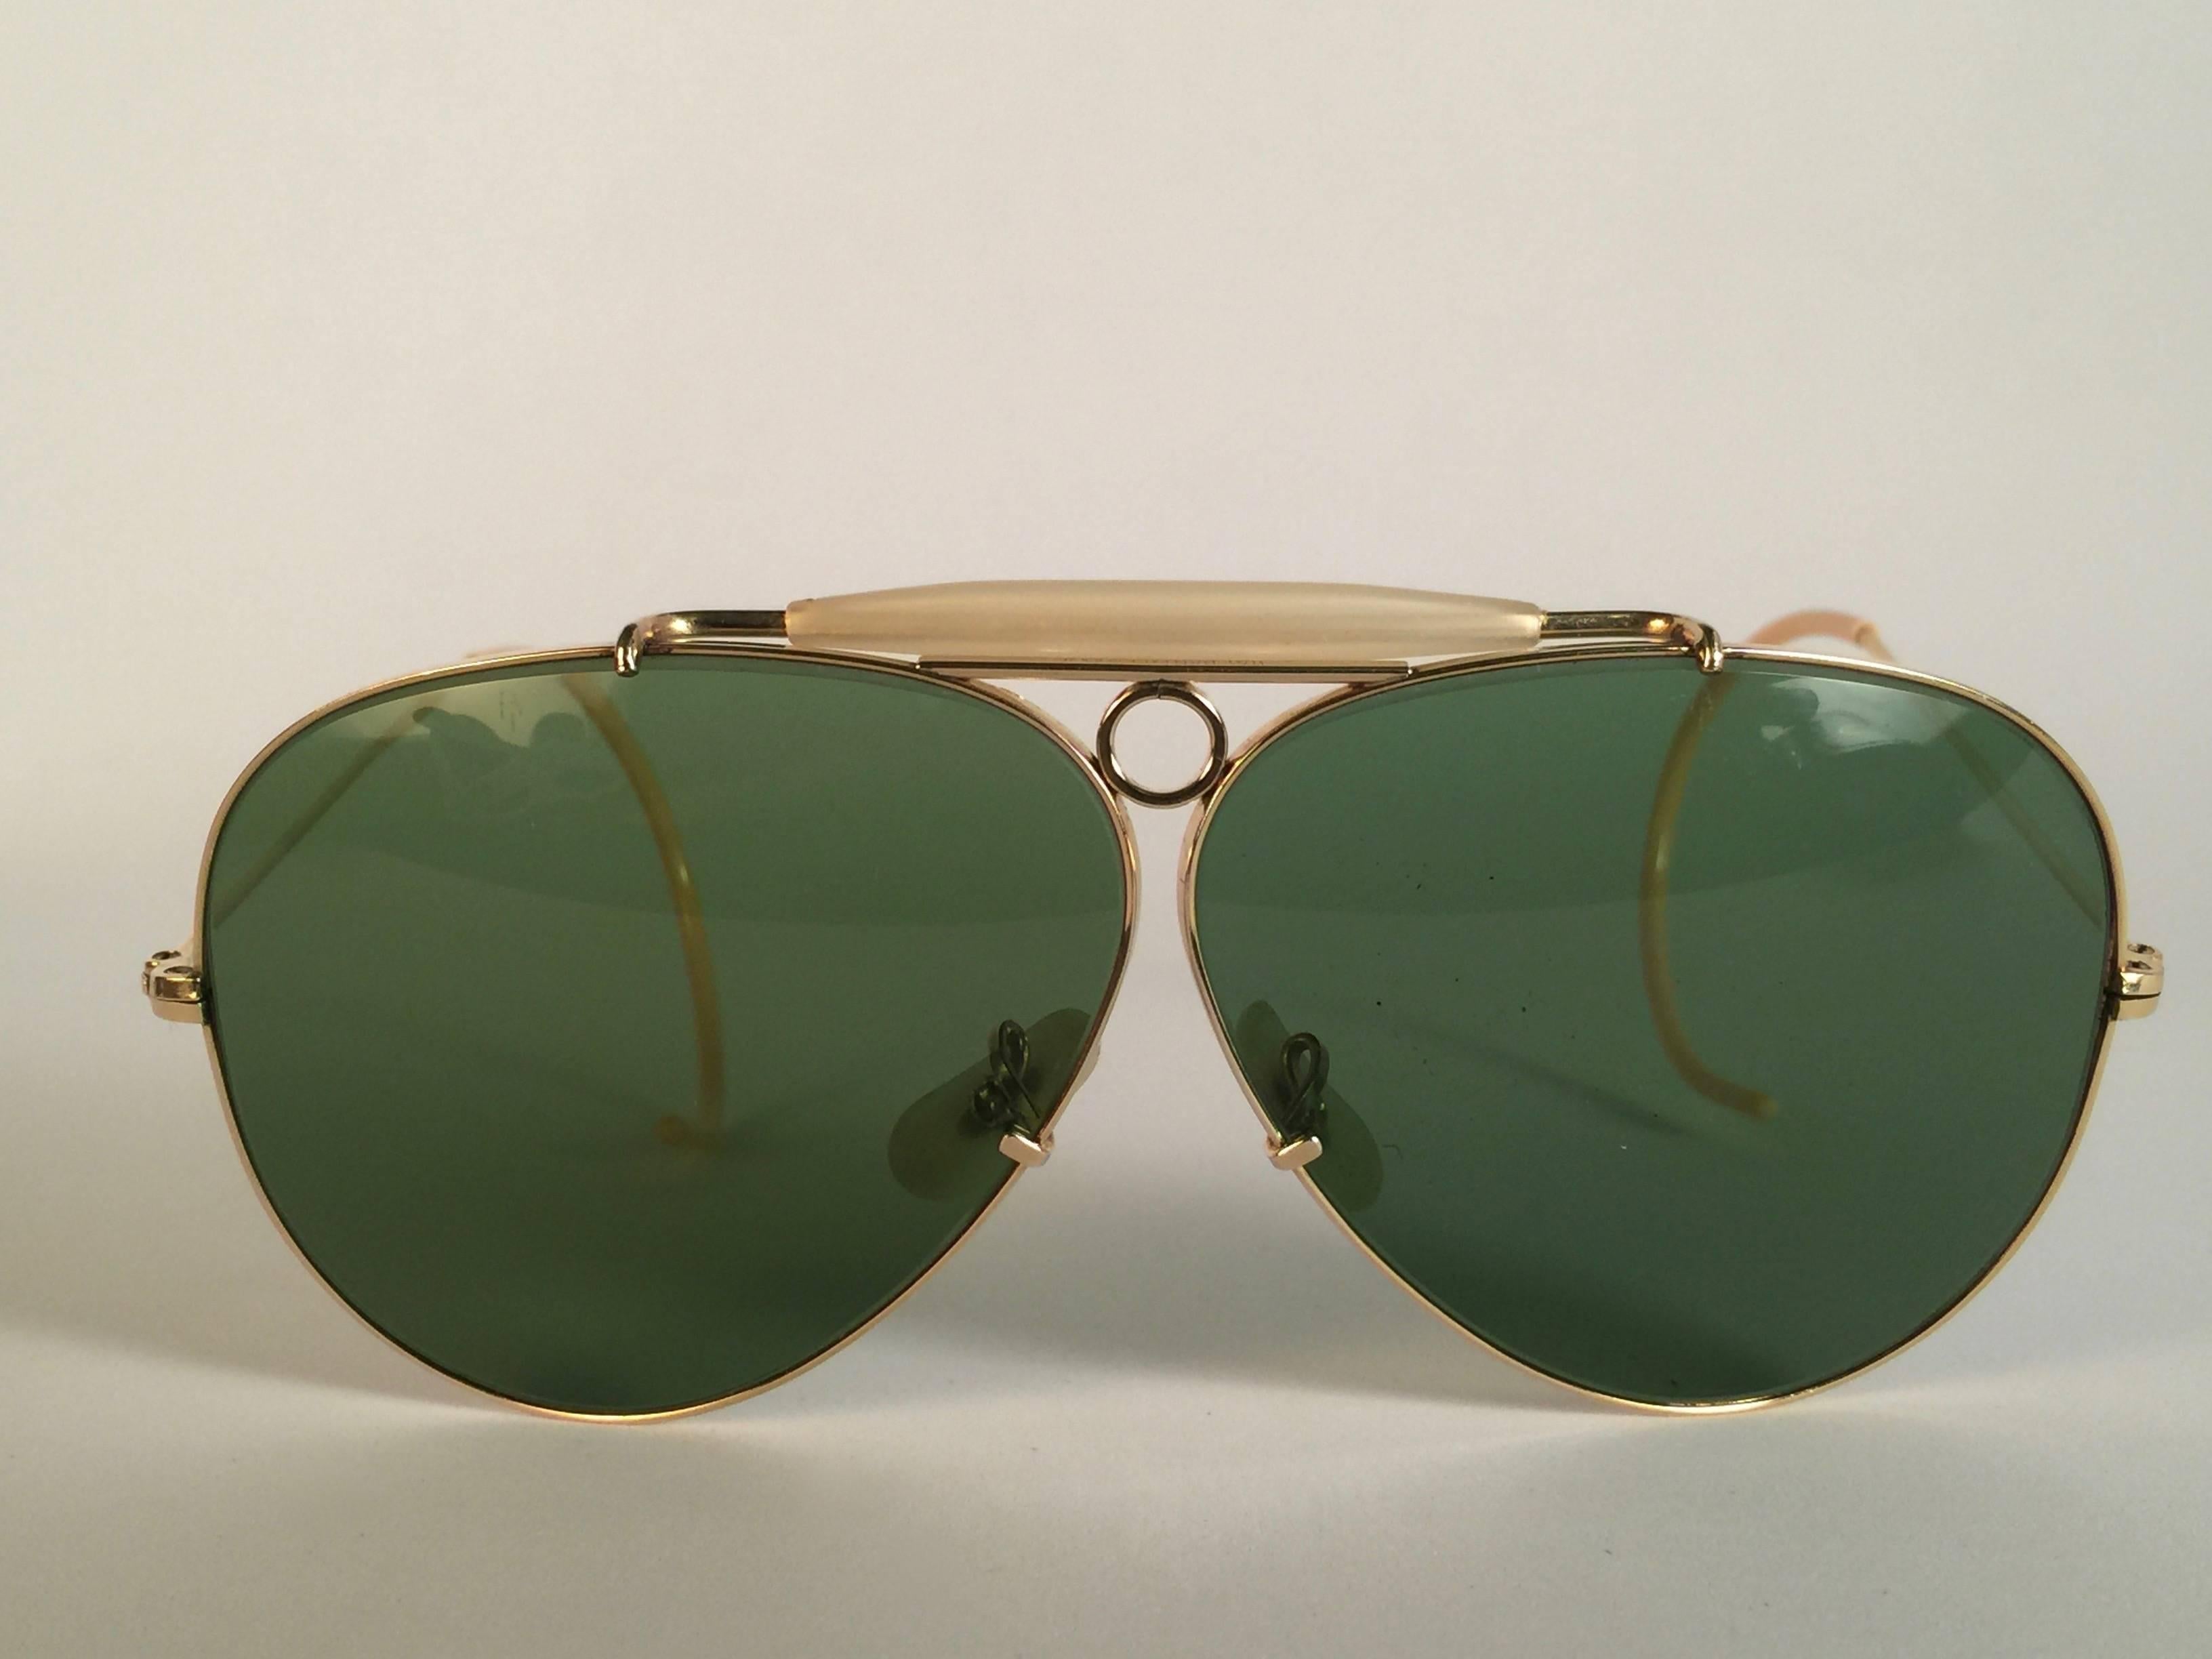 Superb pair Of Ray Ban Classic Outdoorsman 62Mm with 12K gold filled frame.  Gold filigree temples1950's USA Made by Bausch and Lomb. Original True Green RB3 B&L lenses. Frame straight as an arrow with mother of pearl browser. All the hallmarks.